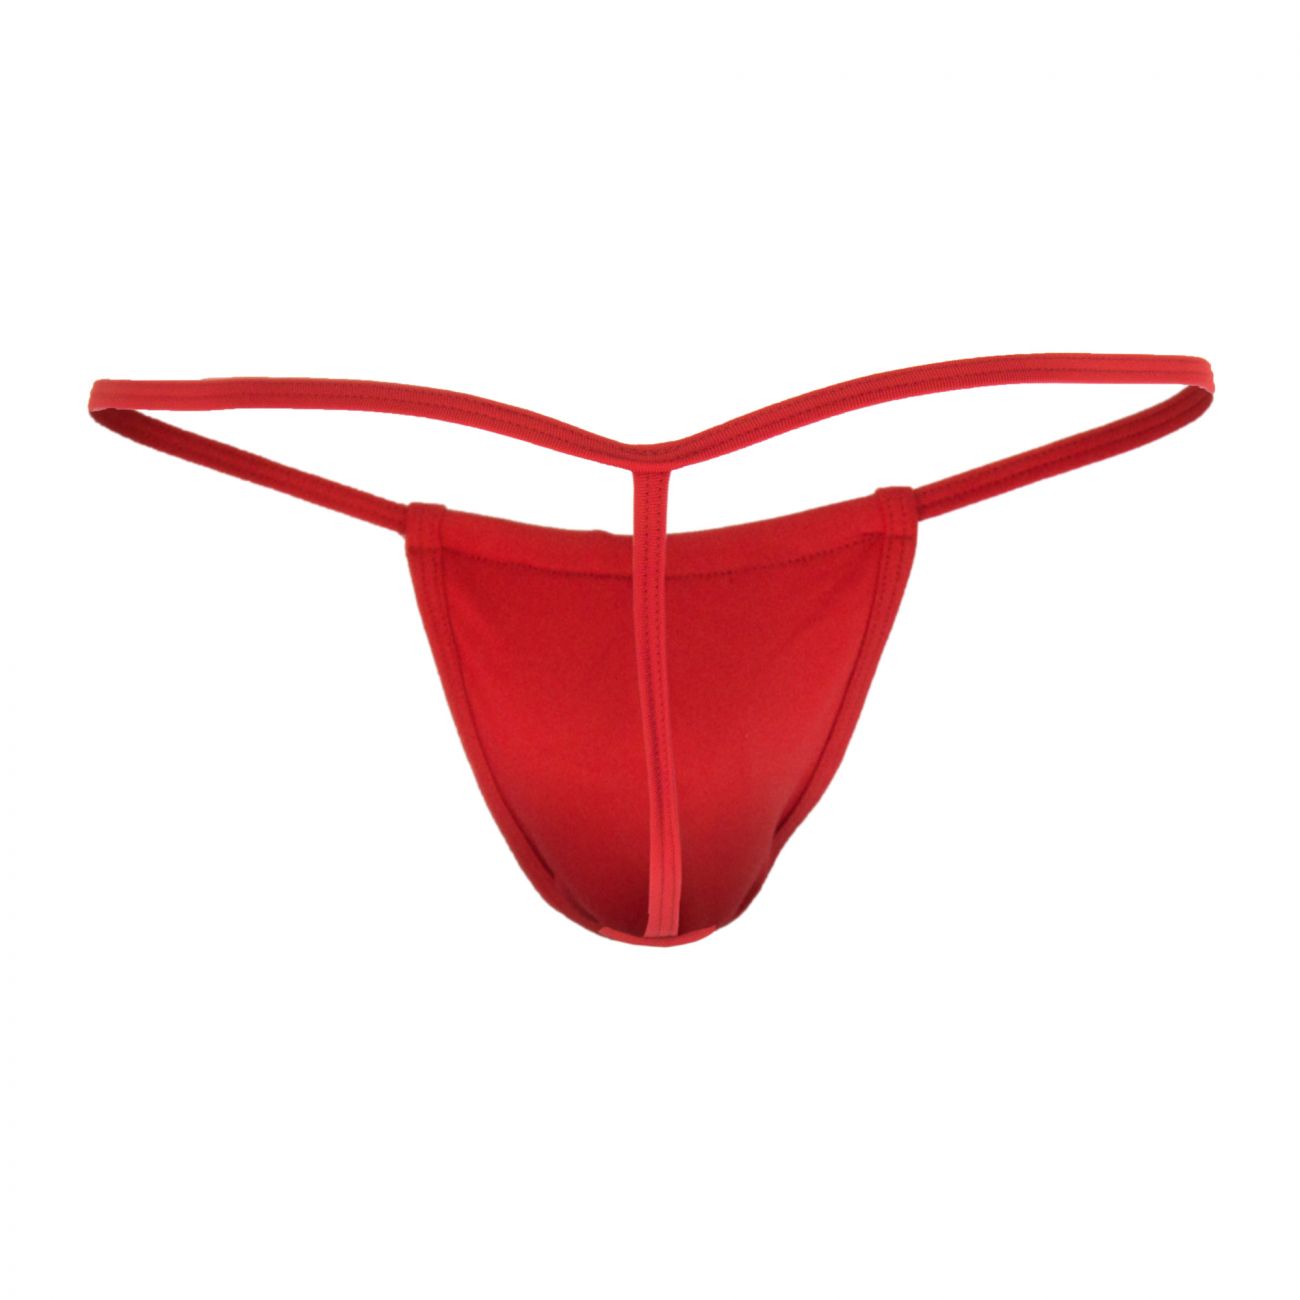 Buy Candyskin Women's Cotton Thong Panty - Red online